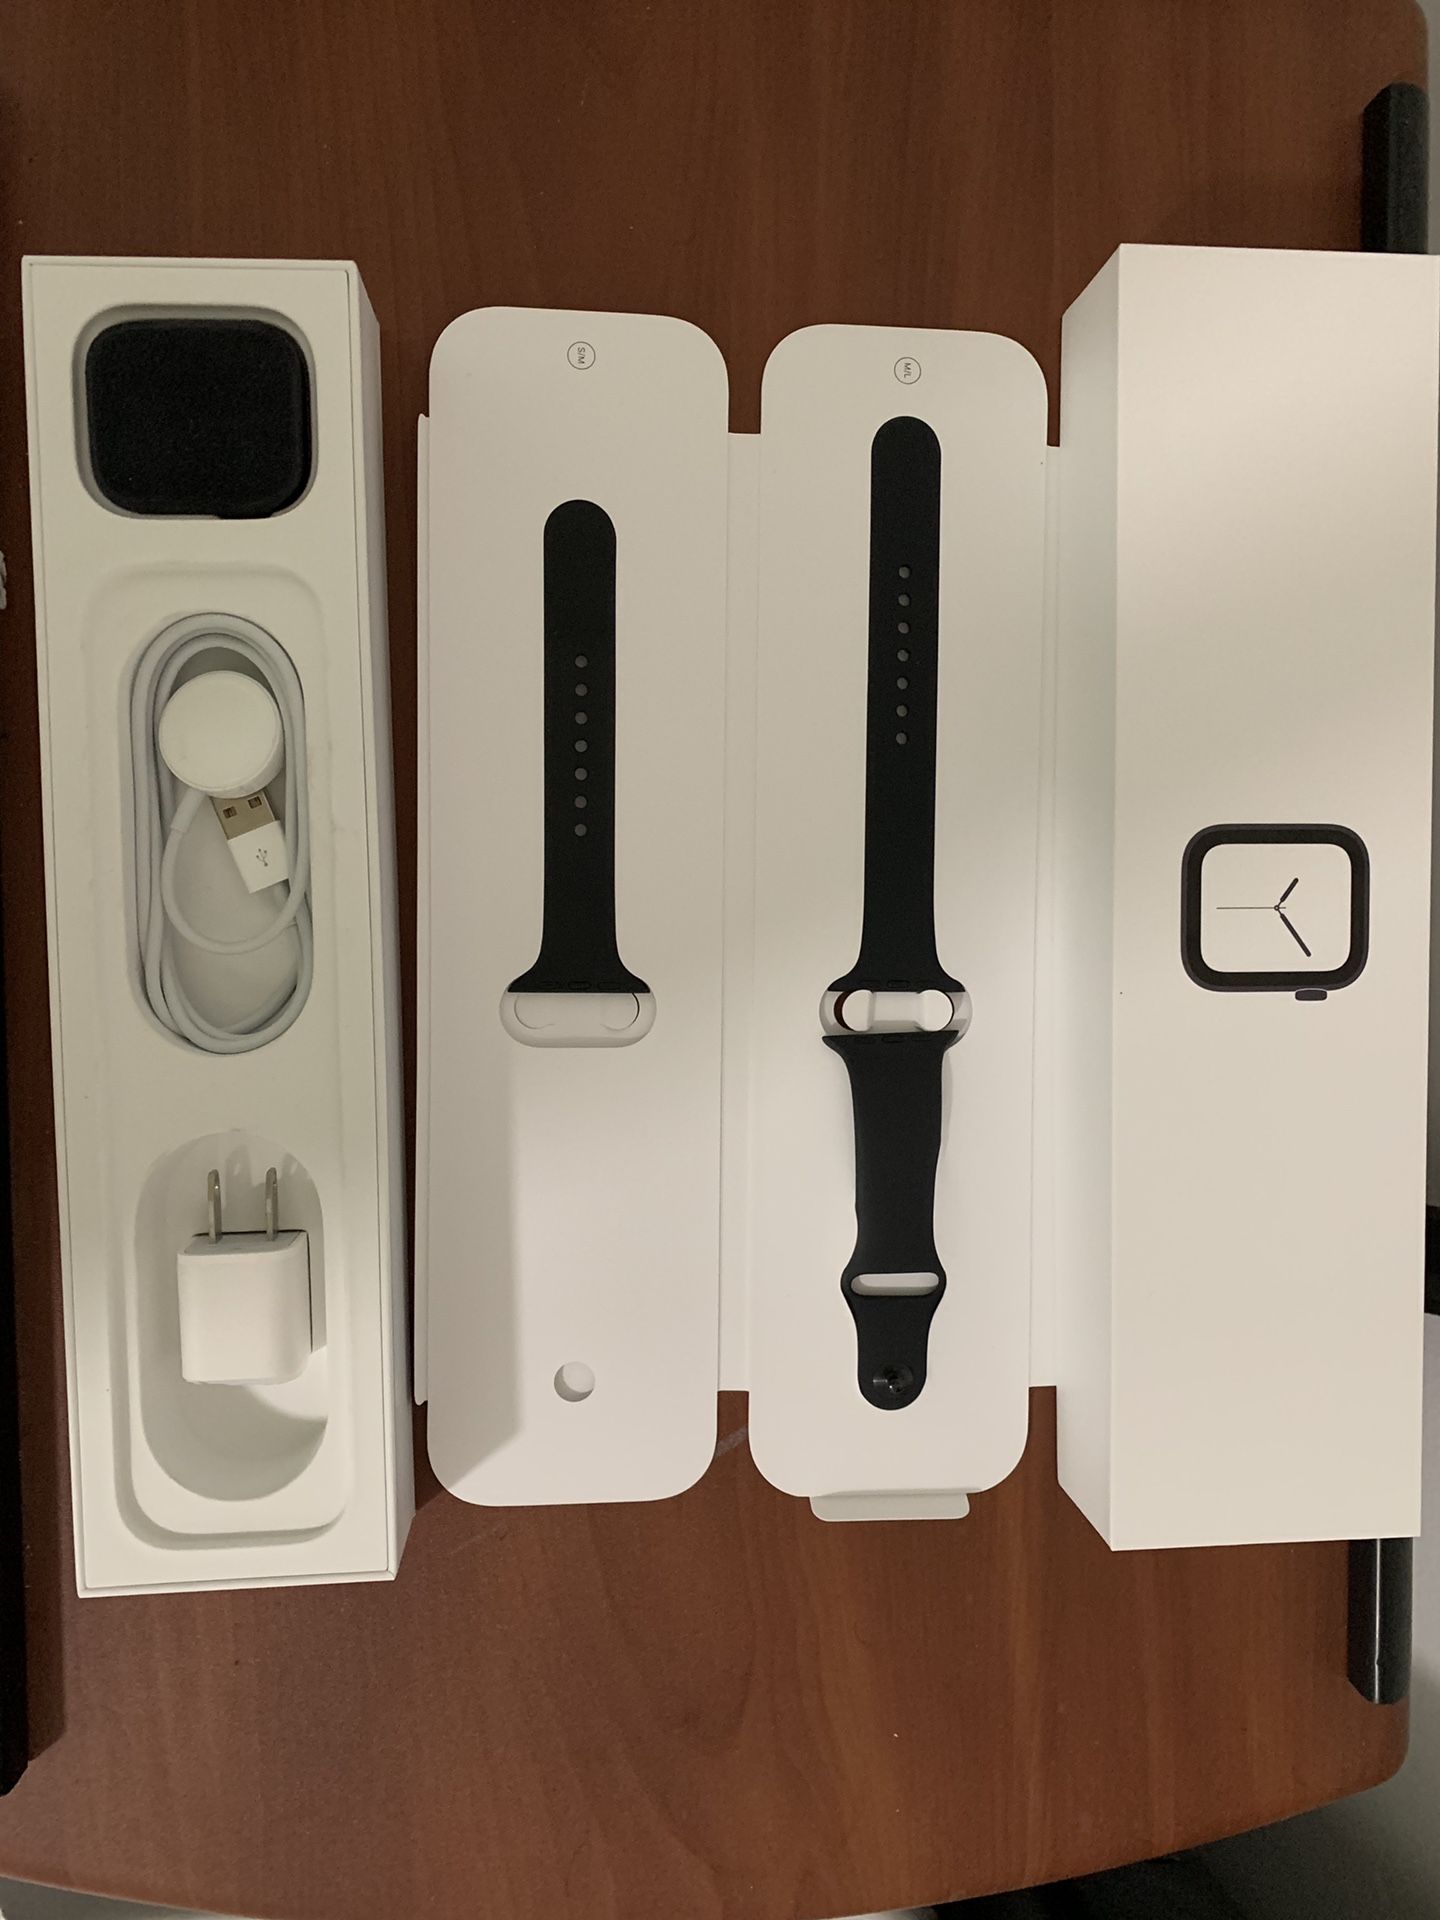 APPLE WATCH SERIES 4 + GPS AND CELLULAR DATA SPACE GRAY ALUMINUM CASE BLACK SPORT BAND